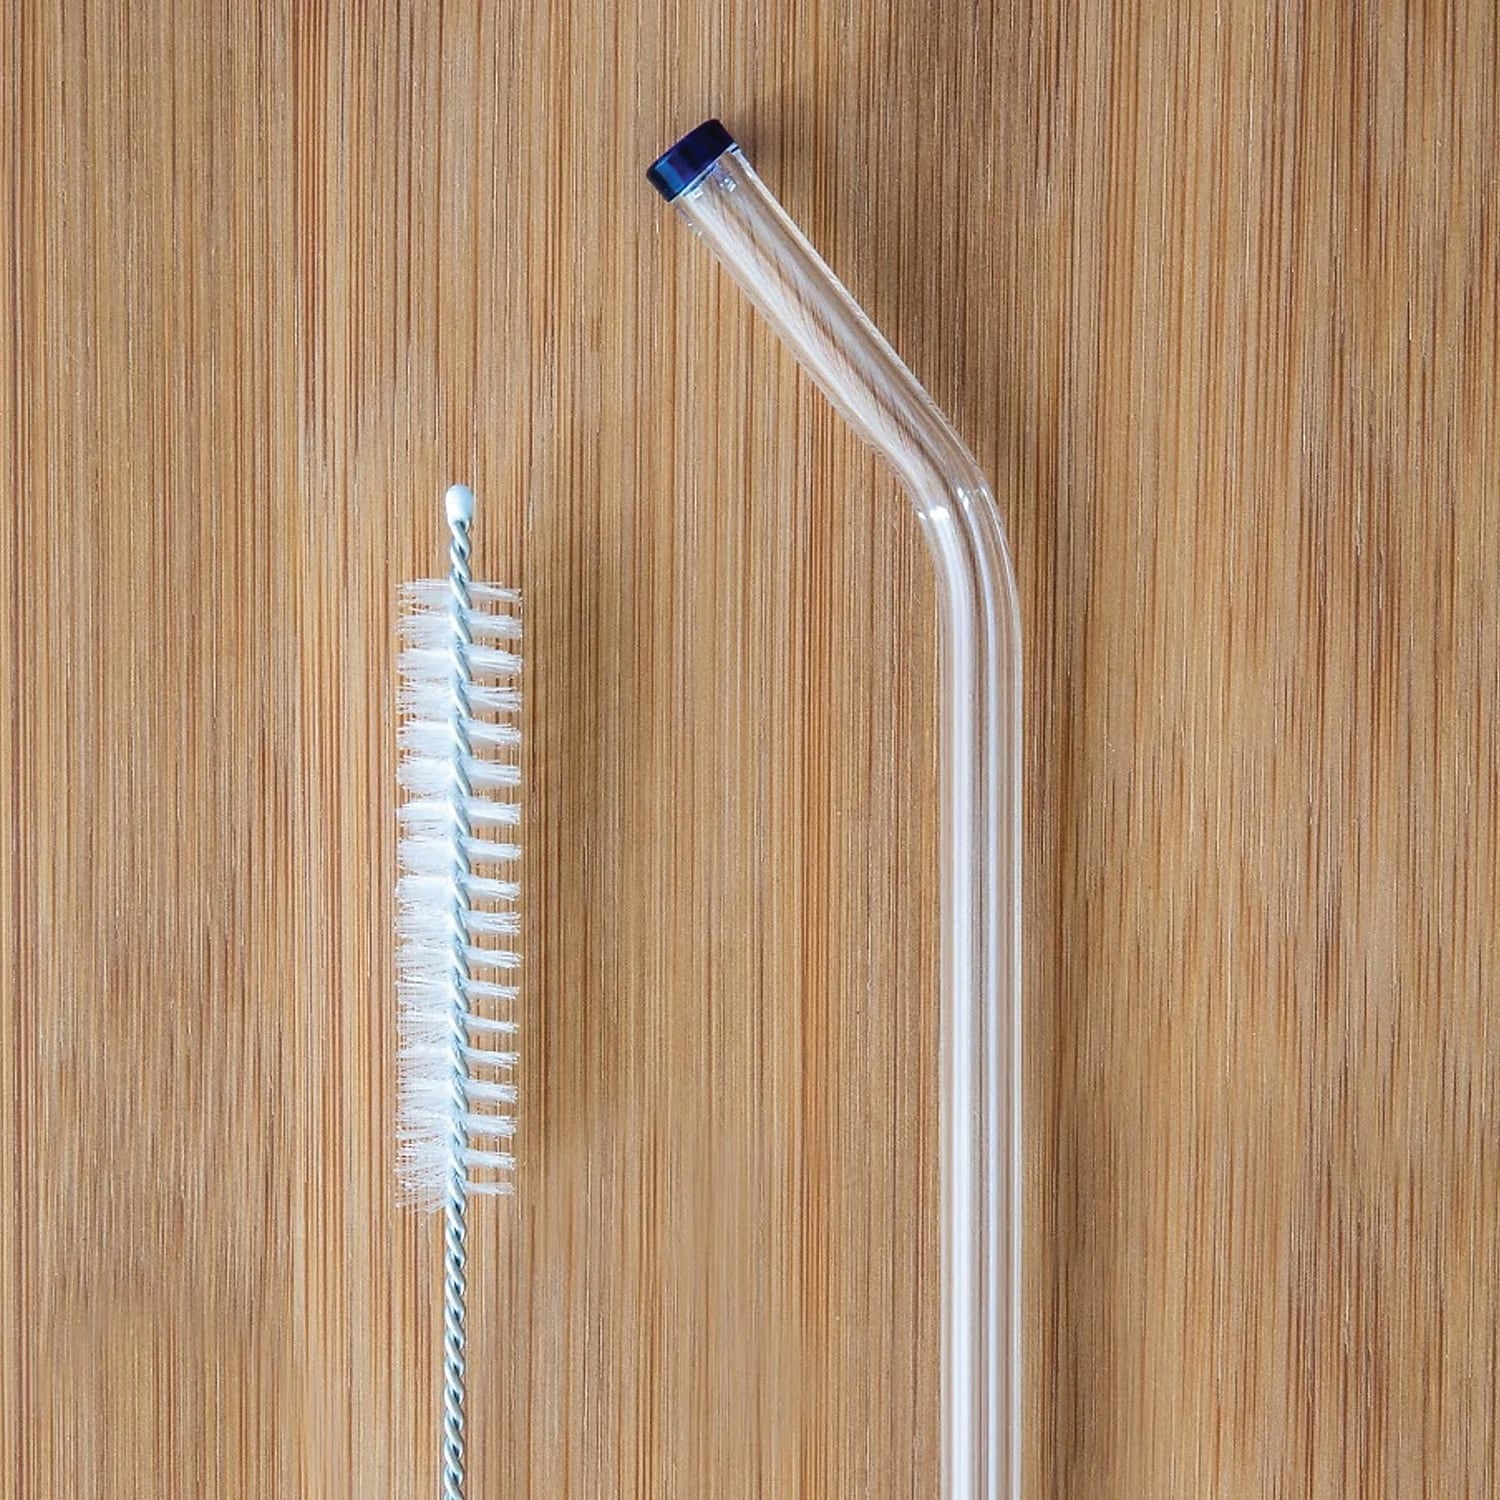  Reusable Glass Straw with Flower,Shatter Resistant Bend Glass  Straws with Design Flower Decorative Cocktails Bar Accessories with  Cleaning Brush (16) : Home & Kitchen